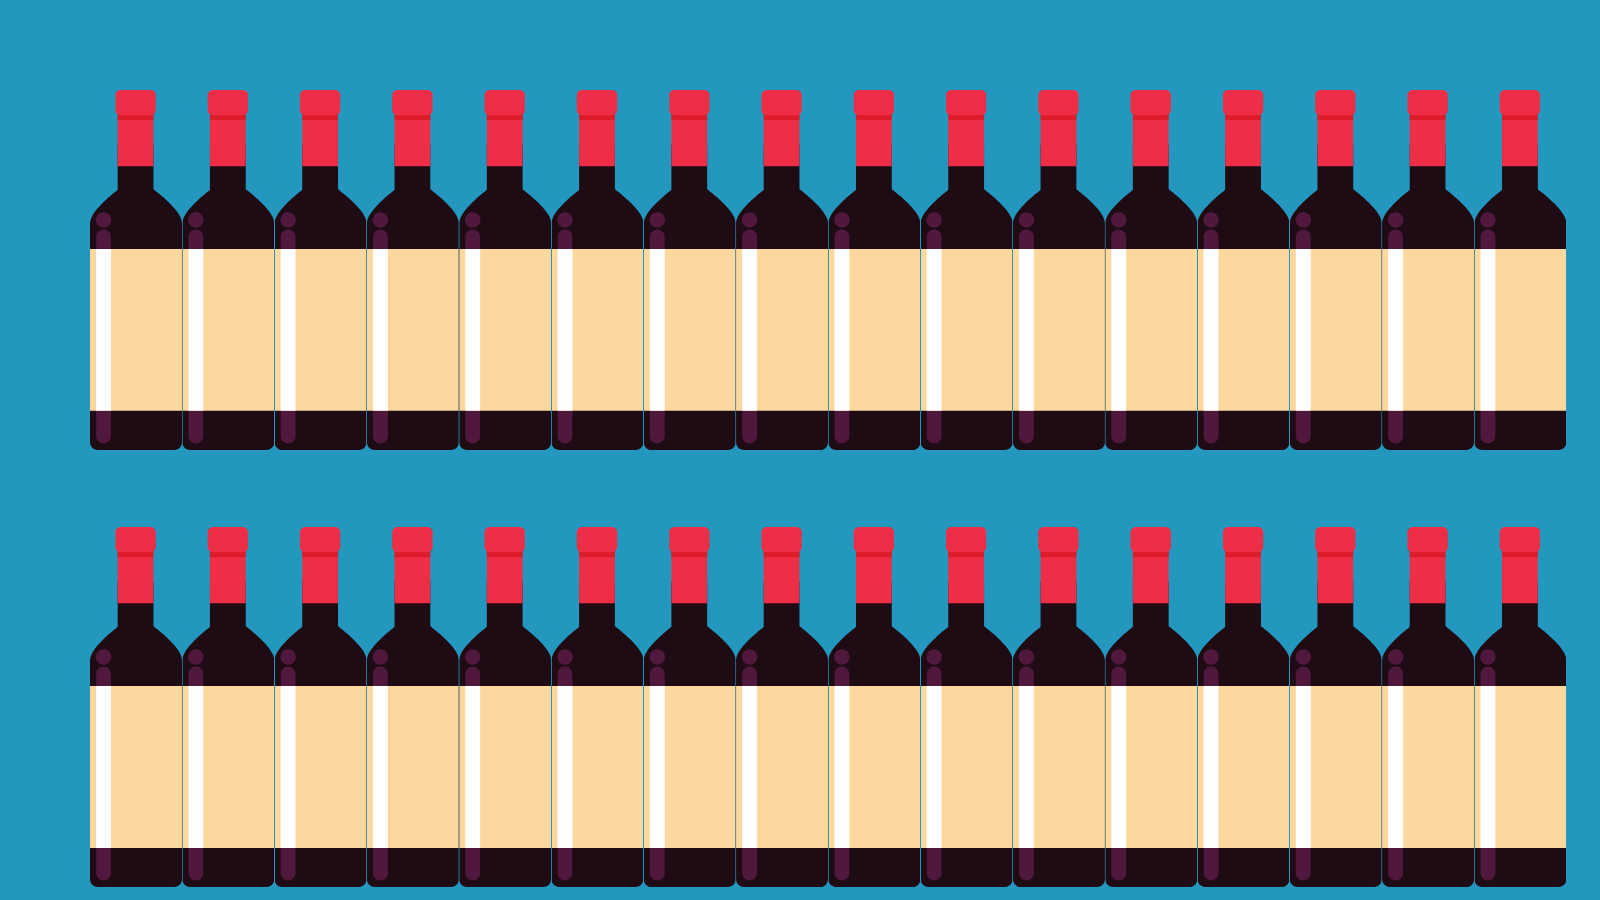 Two rows of identical wine bottles